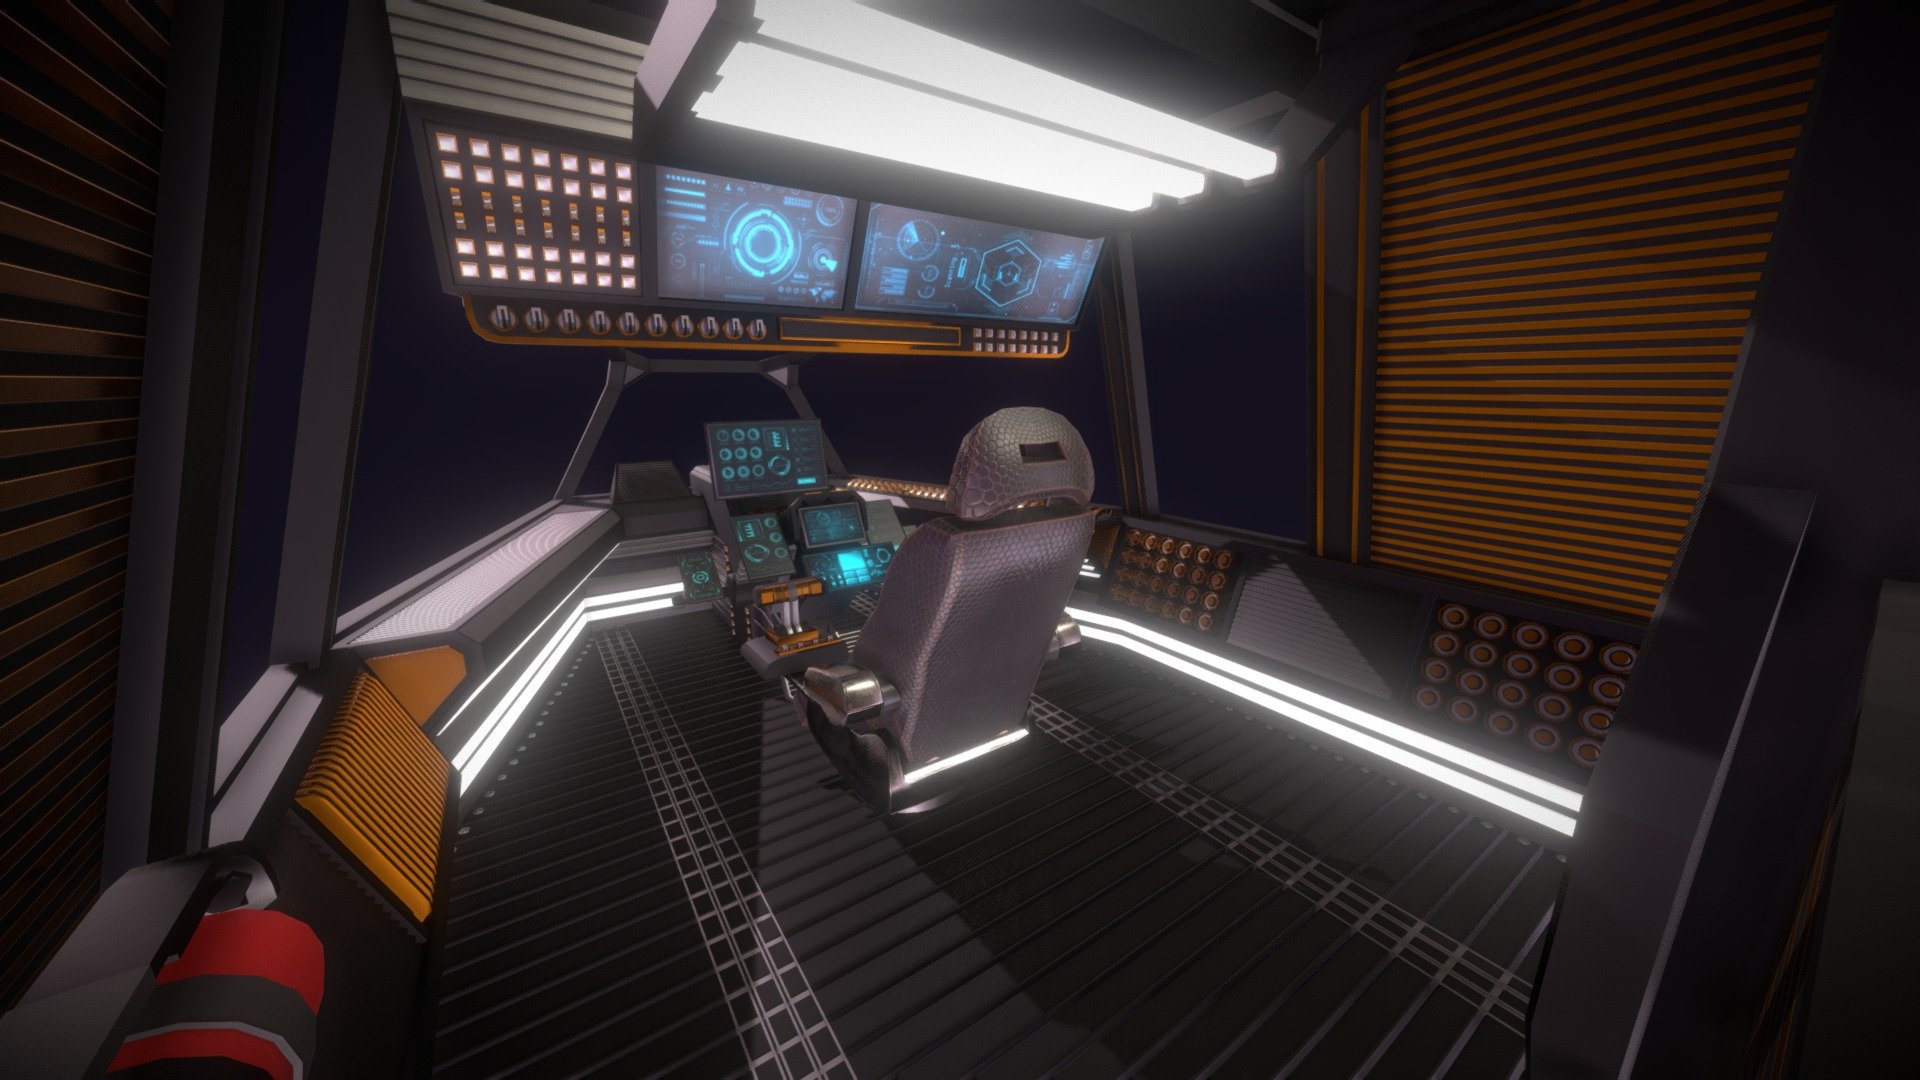 Sci-Fi Fighter Cockpit 3D Model can be used as an engine/core room, futuristic interior, sci-fi scene, etc. in your sci-fi scenes, videos, games, and others.  

All textures and materials are included and mapped in every format. The model is completely ready for visualization in any 3d software and engine.  

Technical details:  




File formats included in the package are: FBX, OBJ, GLB, PLY, STL, ABC, DAE, BLEND, gLTF (generated), USDZ (generated)

Native software file format: BLEND

Render engine: Cycles

Polygons: 60,307

Vertices: 63,369

Textures: Base, Emissive, Metallic, Mixed AO, Normal, Roughness

All textures are 2k resolution.

Note:  




The model is split into 15 parts. All of them use the same material besides the glass. In the Blend file it uses the glass (transparent) shader (which can be recreated in any 3D software). Or the glass model can be simply turned off if needed.
 - Sci-Fi Fighter Cockpit 3D Model - Buy Royalty Free 3D model by 3DDisco 3d model